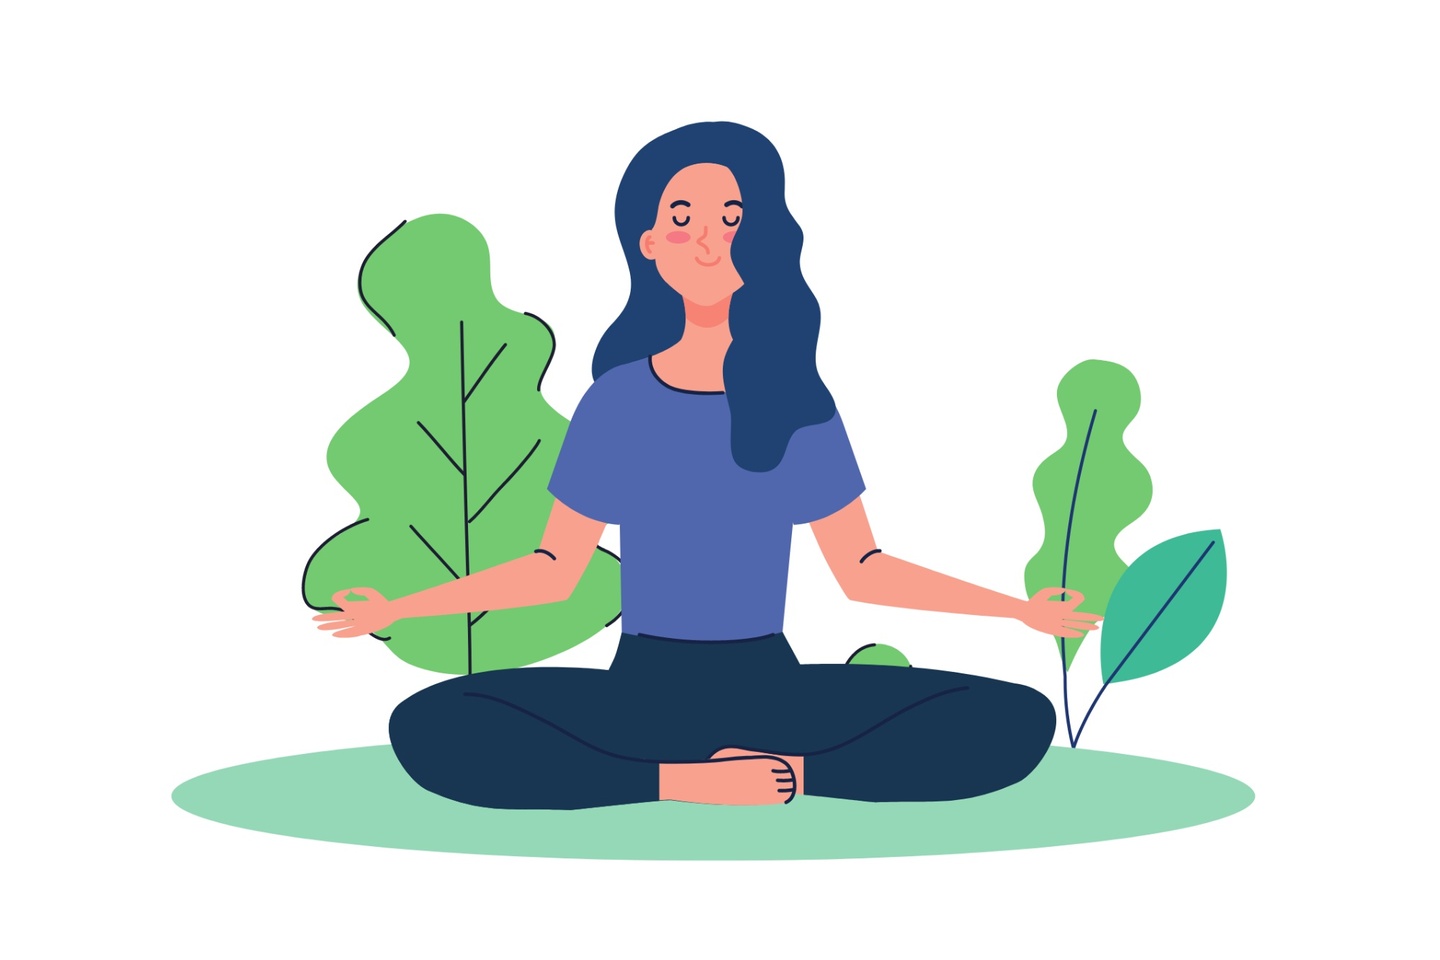 A seated woman in meditation pose with arms outstretched, in front of simplistically drawn greenery